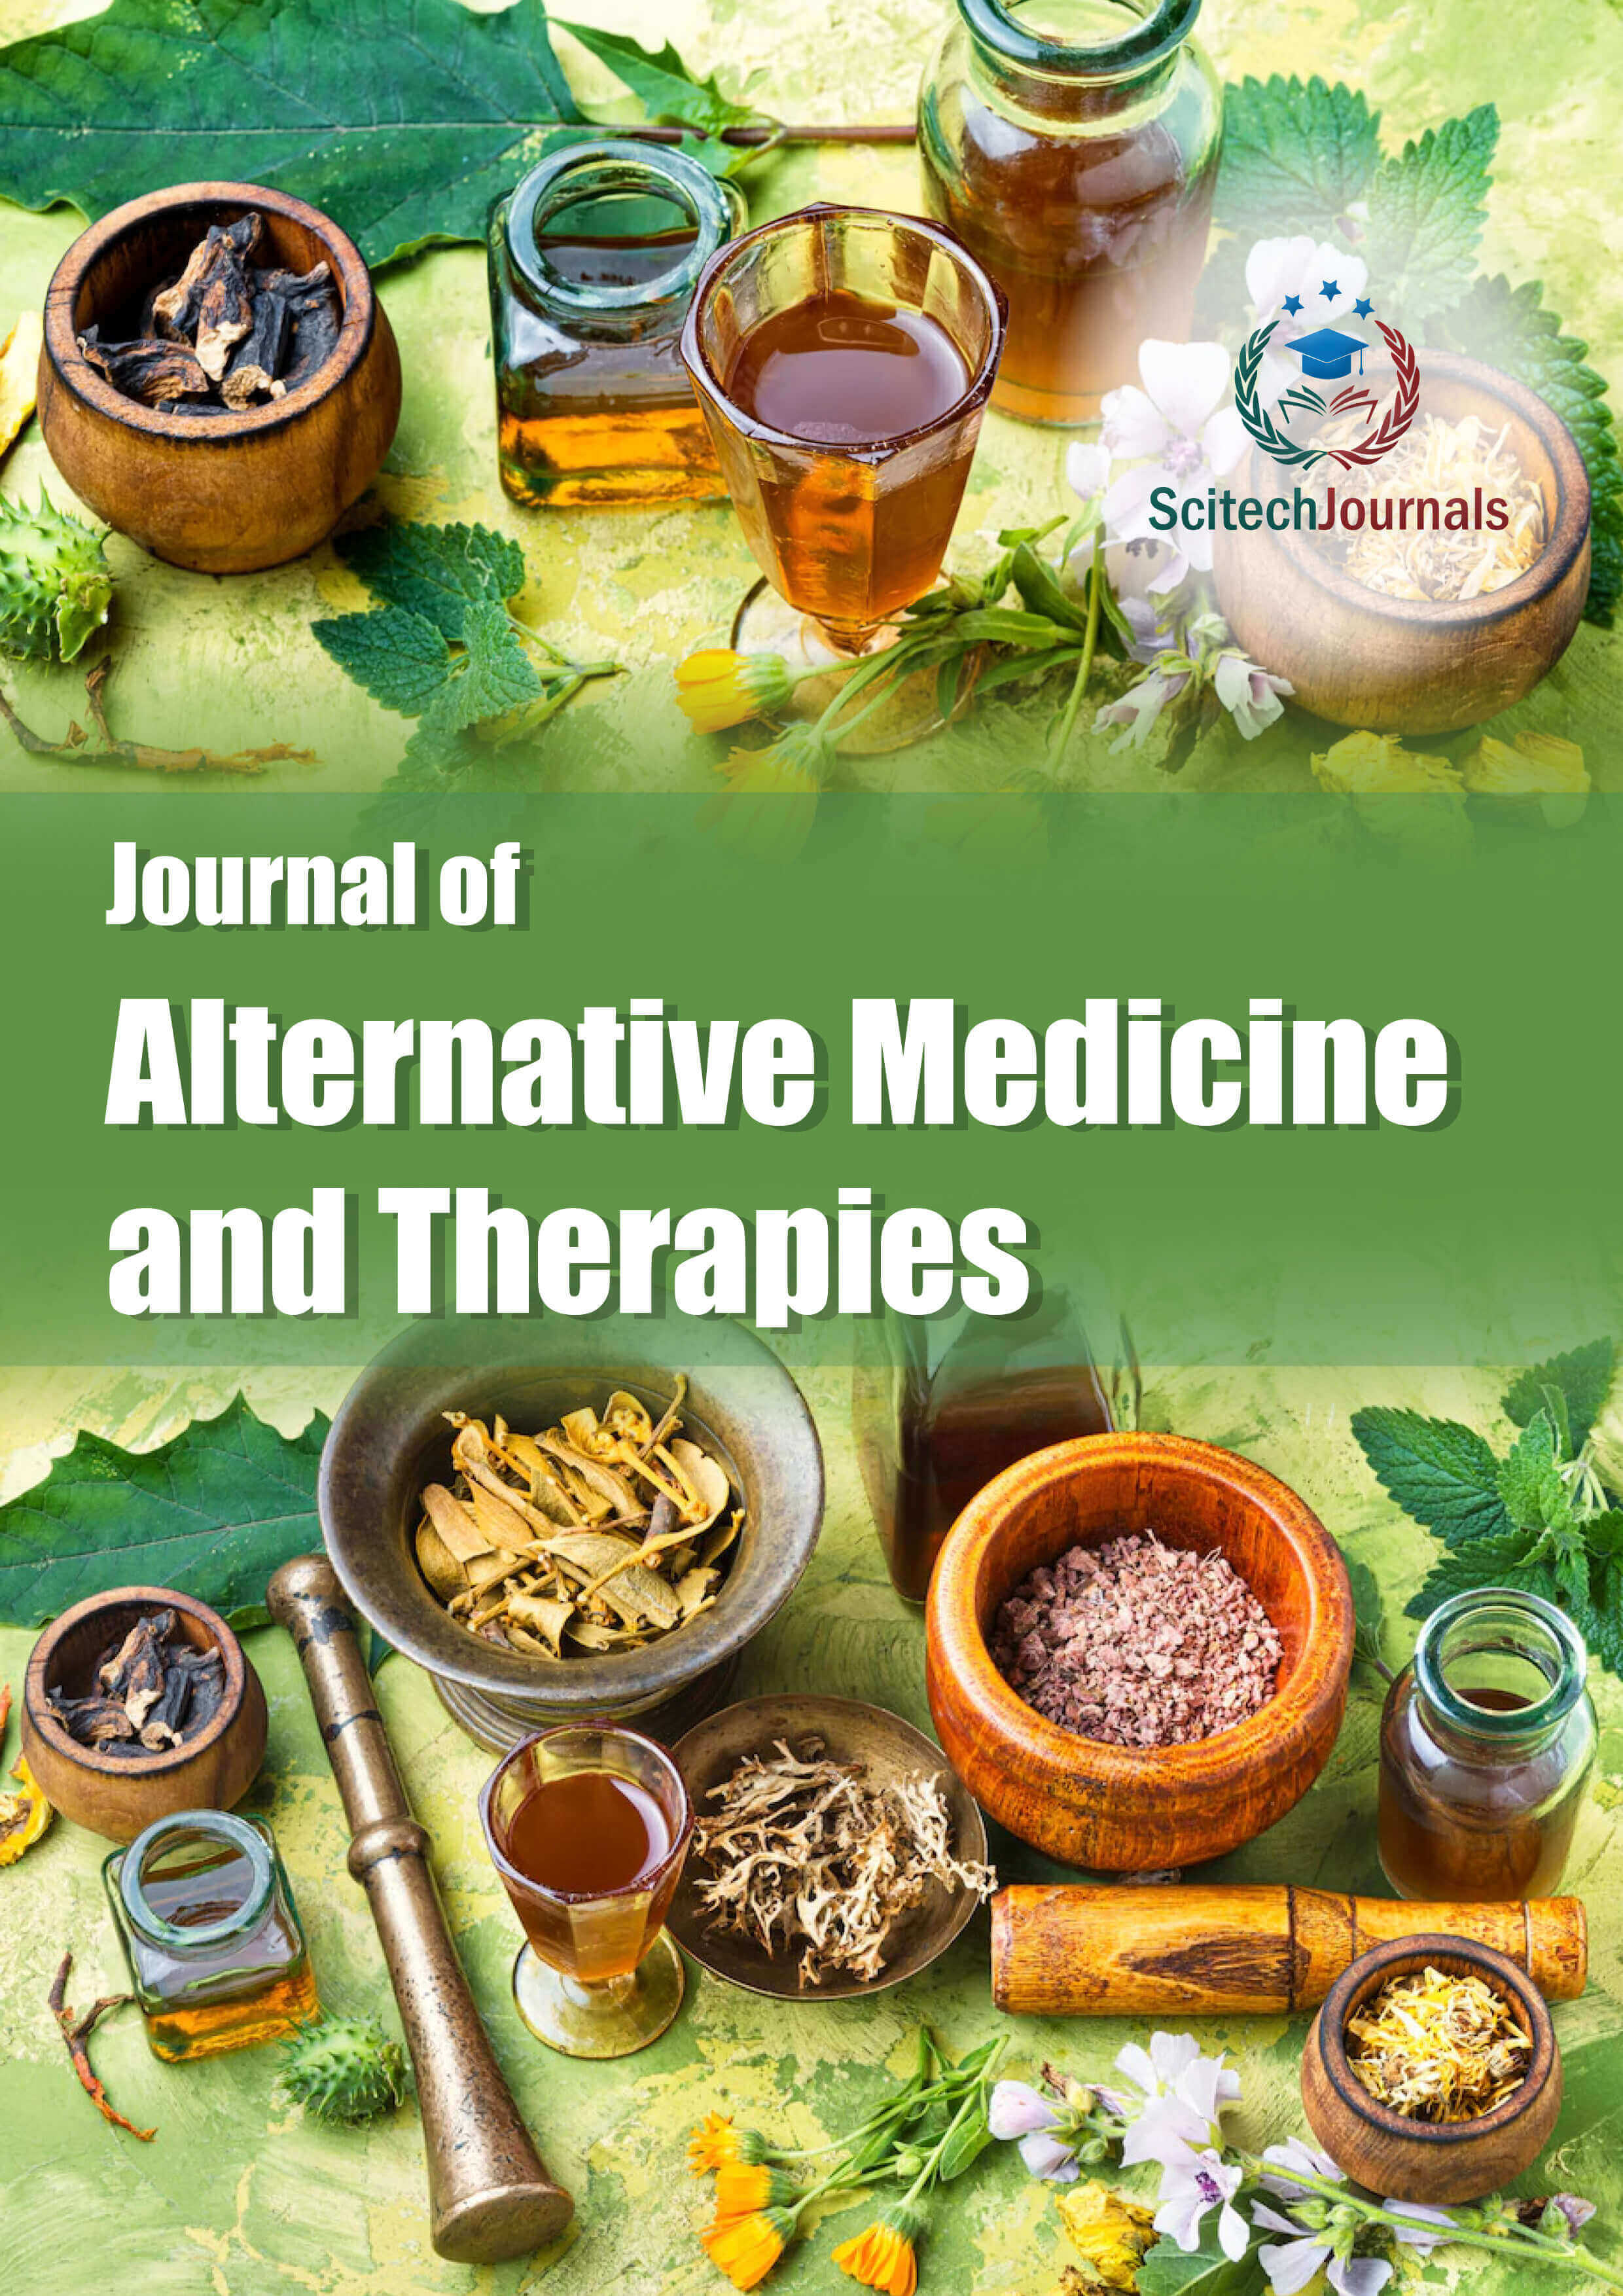 Journal of Alternative Medicine and Therapies